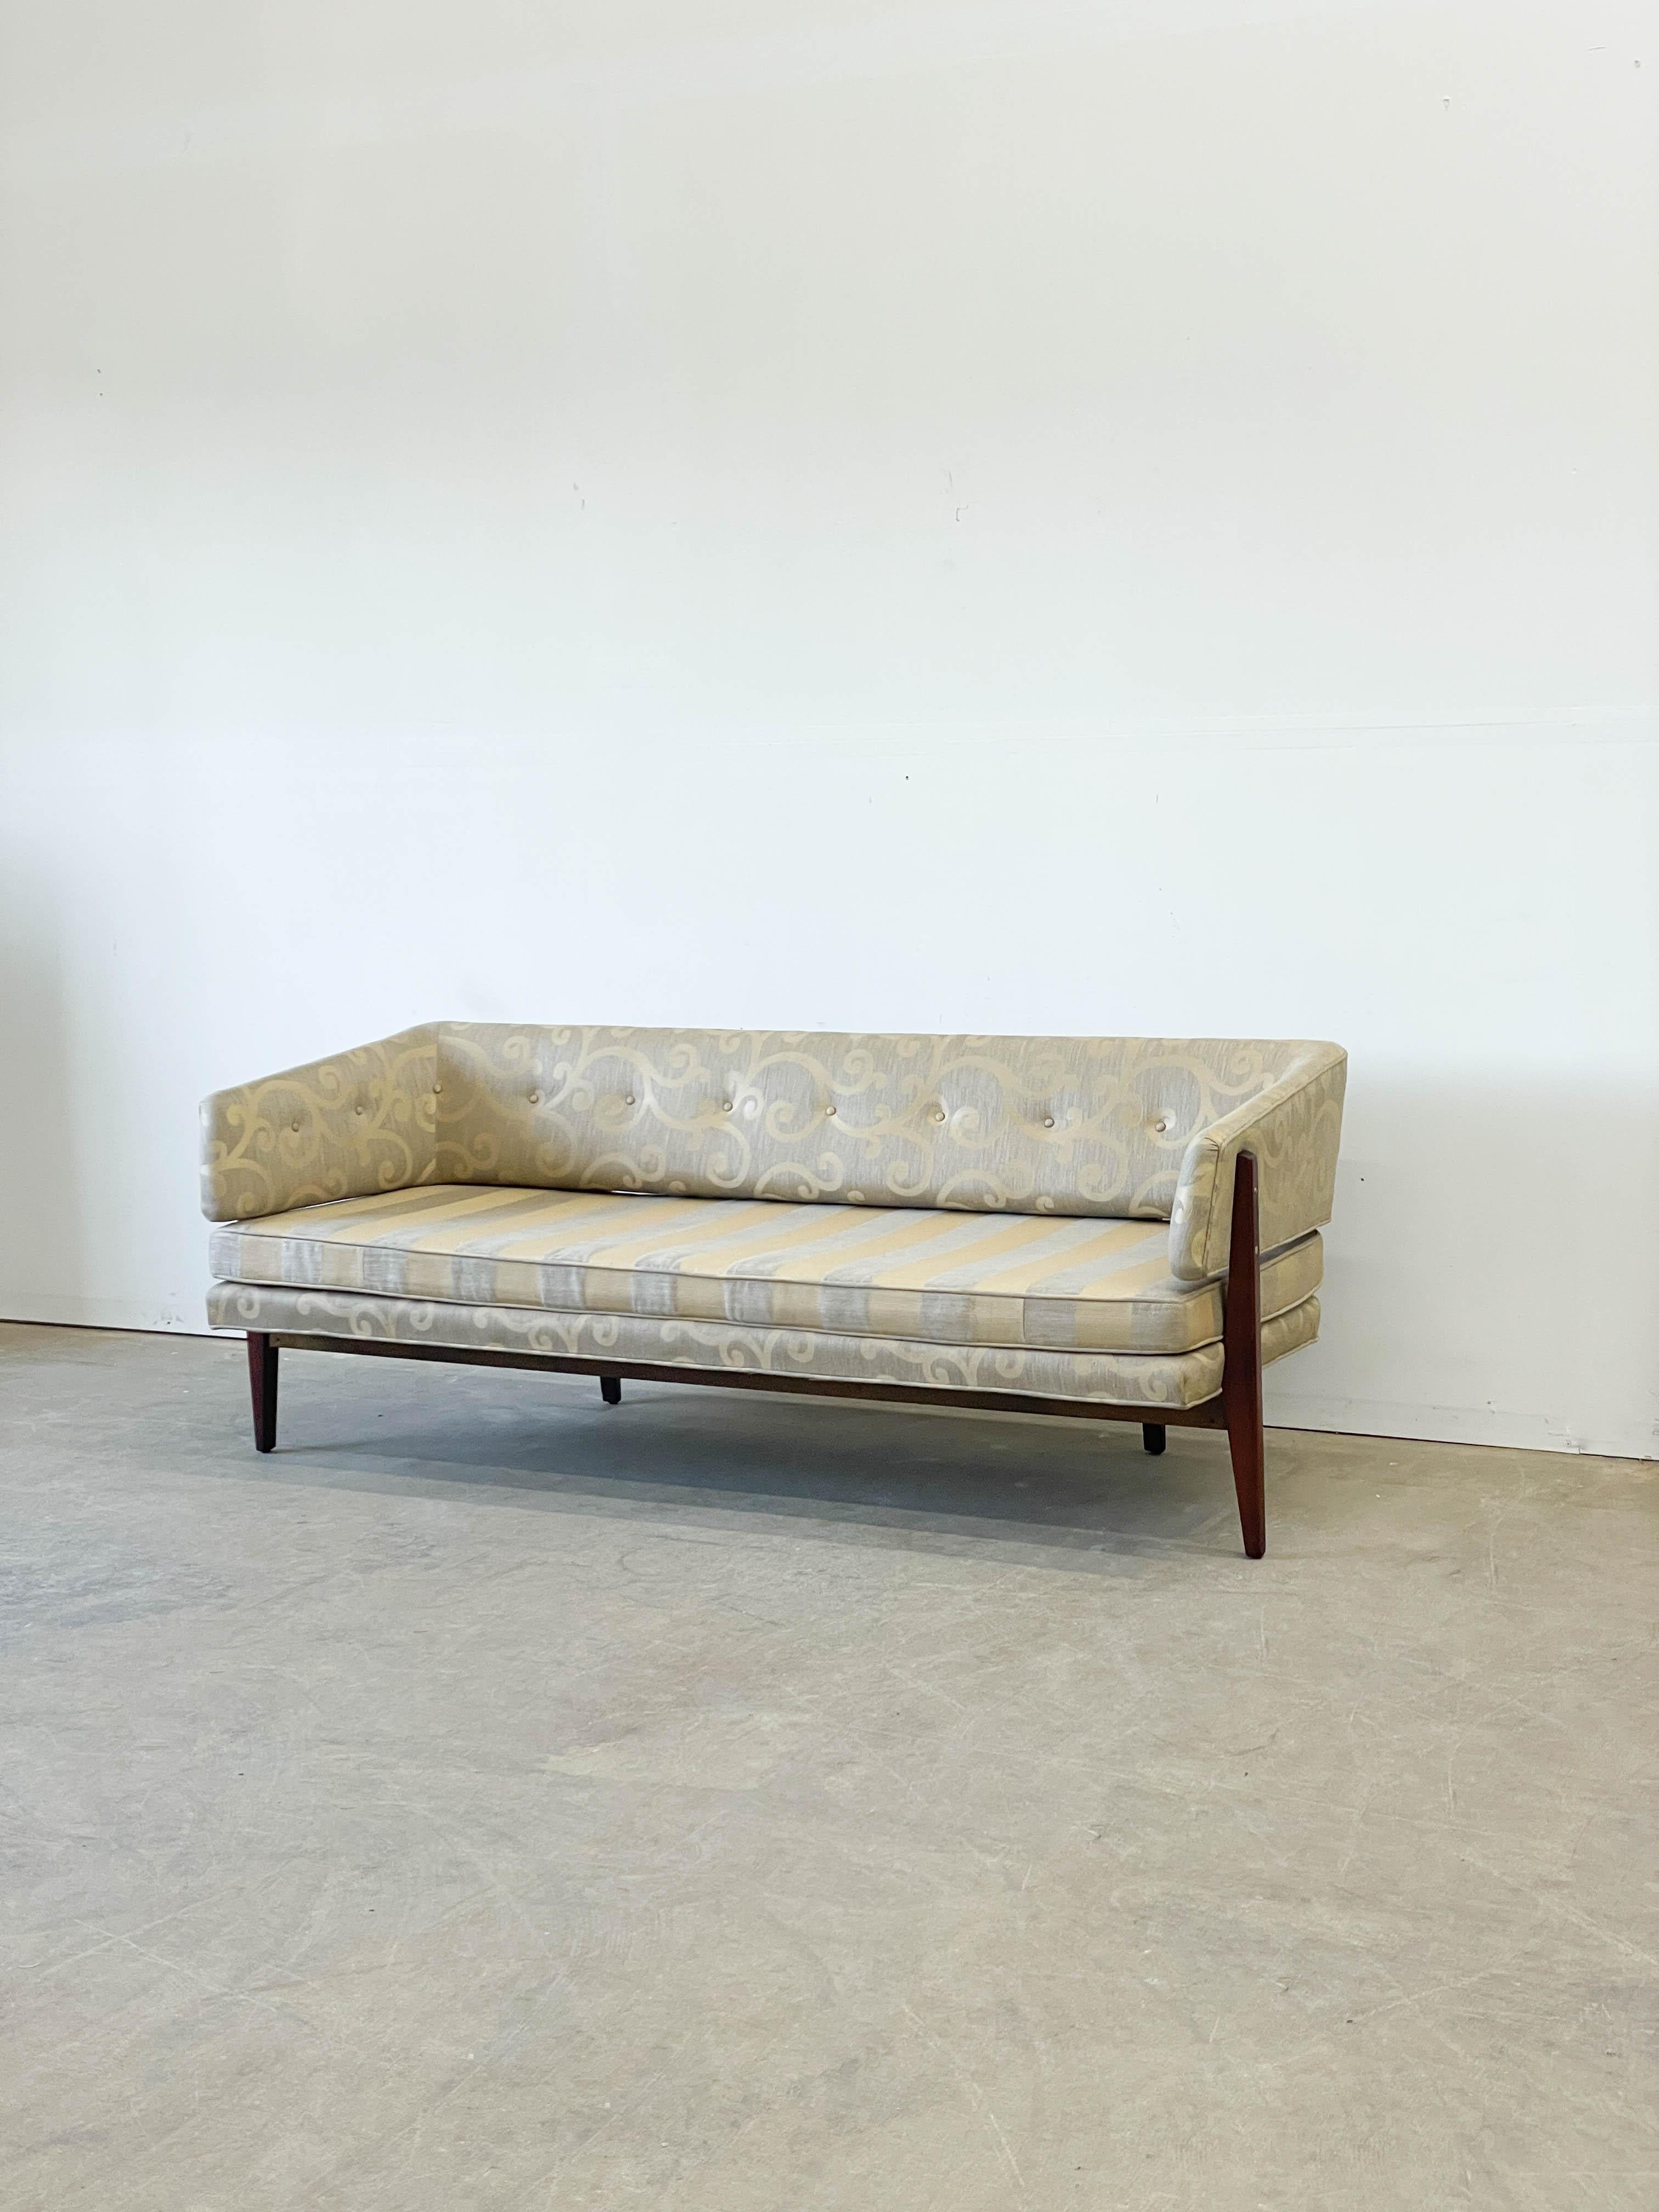 Rare 1950s sofa design by Edward Wormley for Dunbar featuring a beautiful exposed mahogany frame and a floating arm and back section. Showcasing Wormley's deft skill of transforming traditional seating forms into modern classics, this sofa is a real